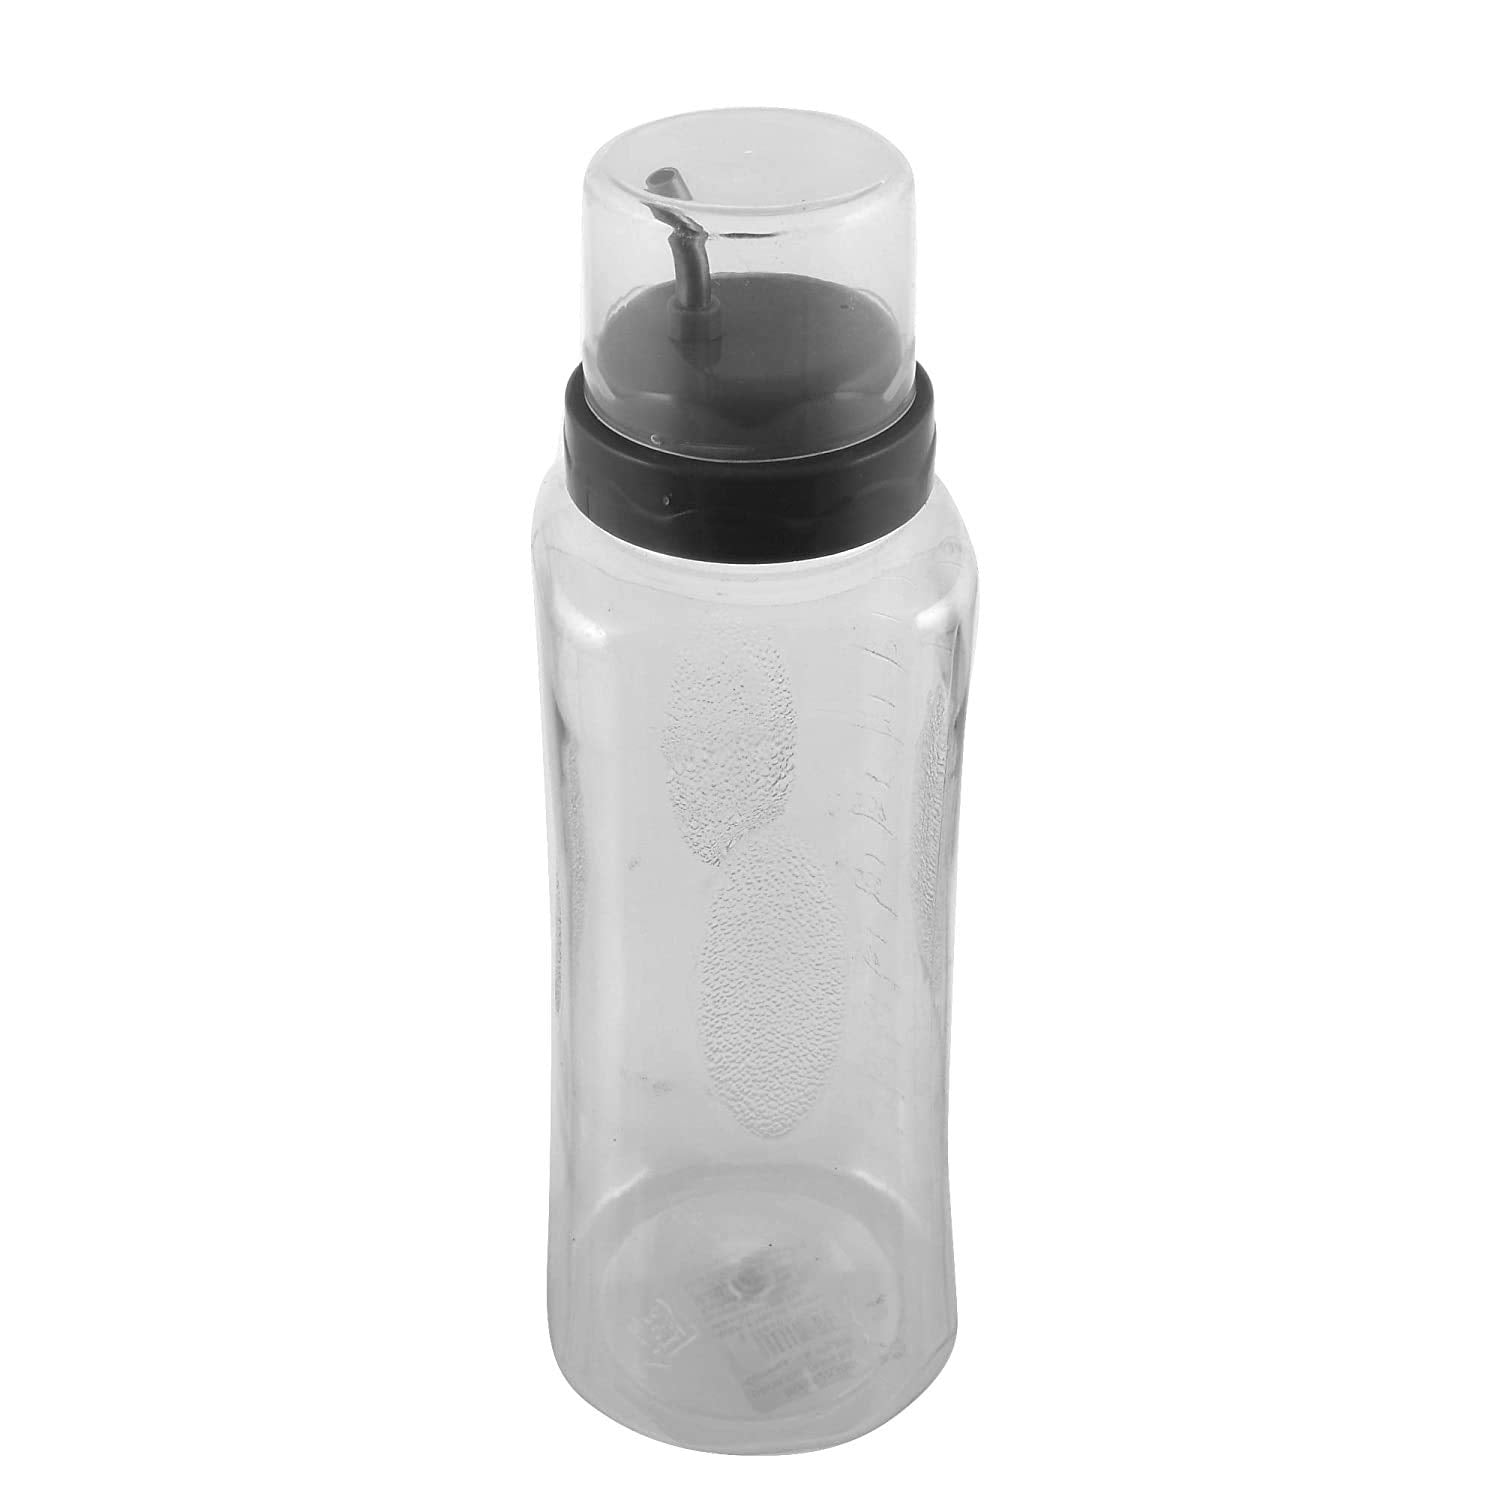 Kuber Industries 600 ML Transparent Olive Oil Dispenser, Oil Container With Stainless Steel Spout- Pack of 2 (Grey)